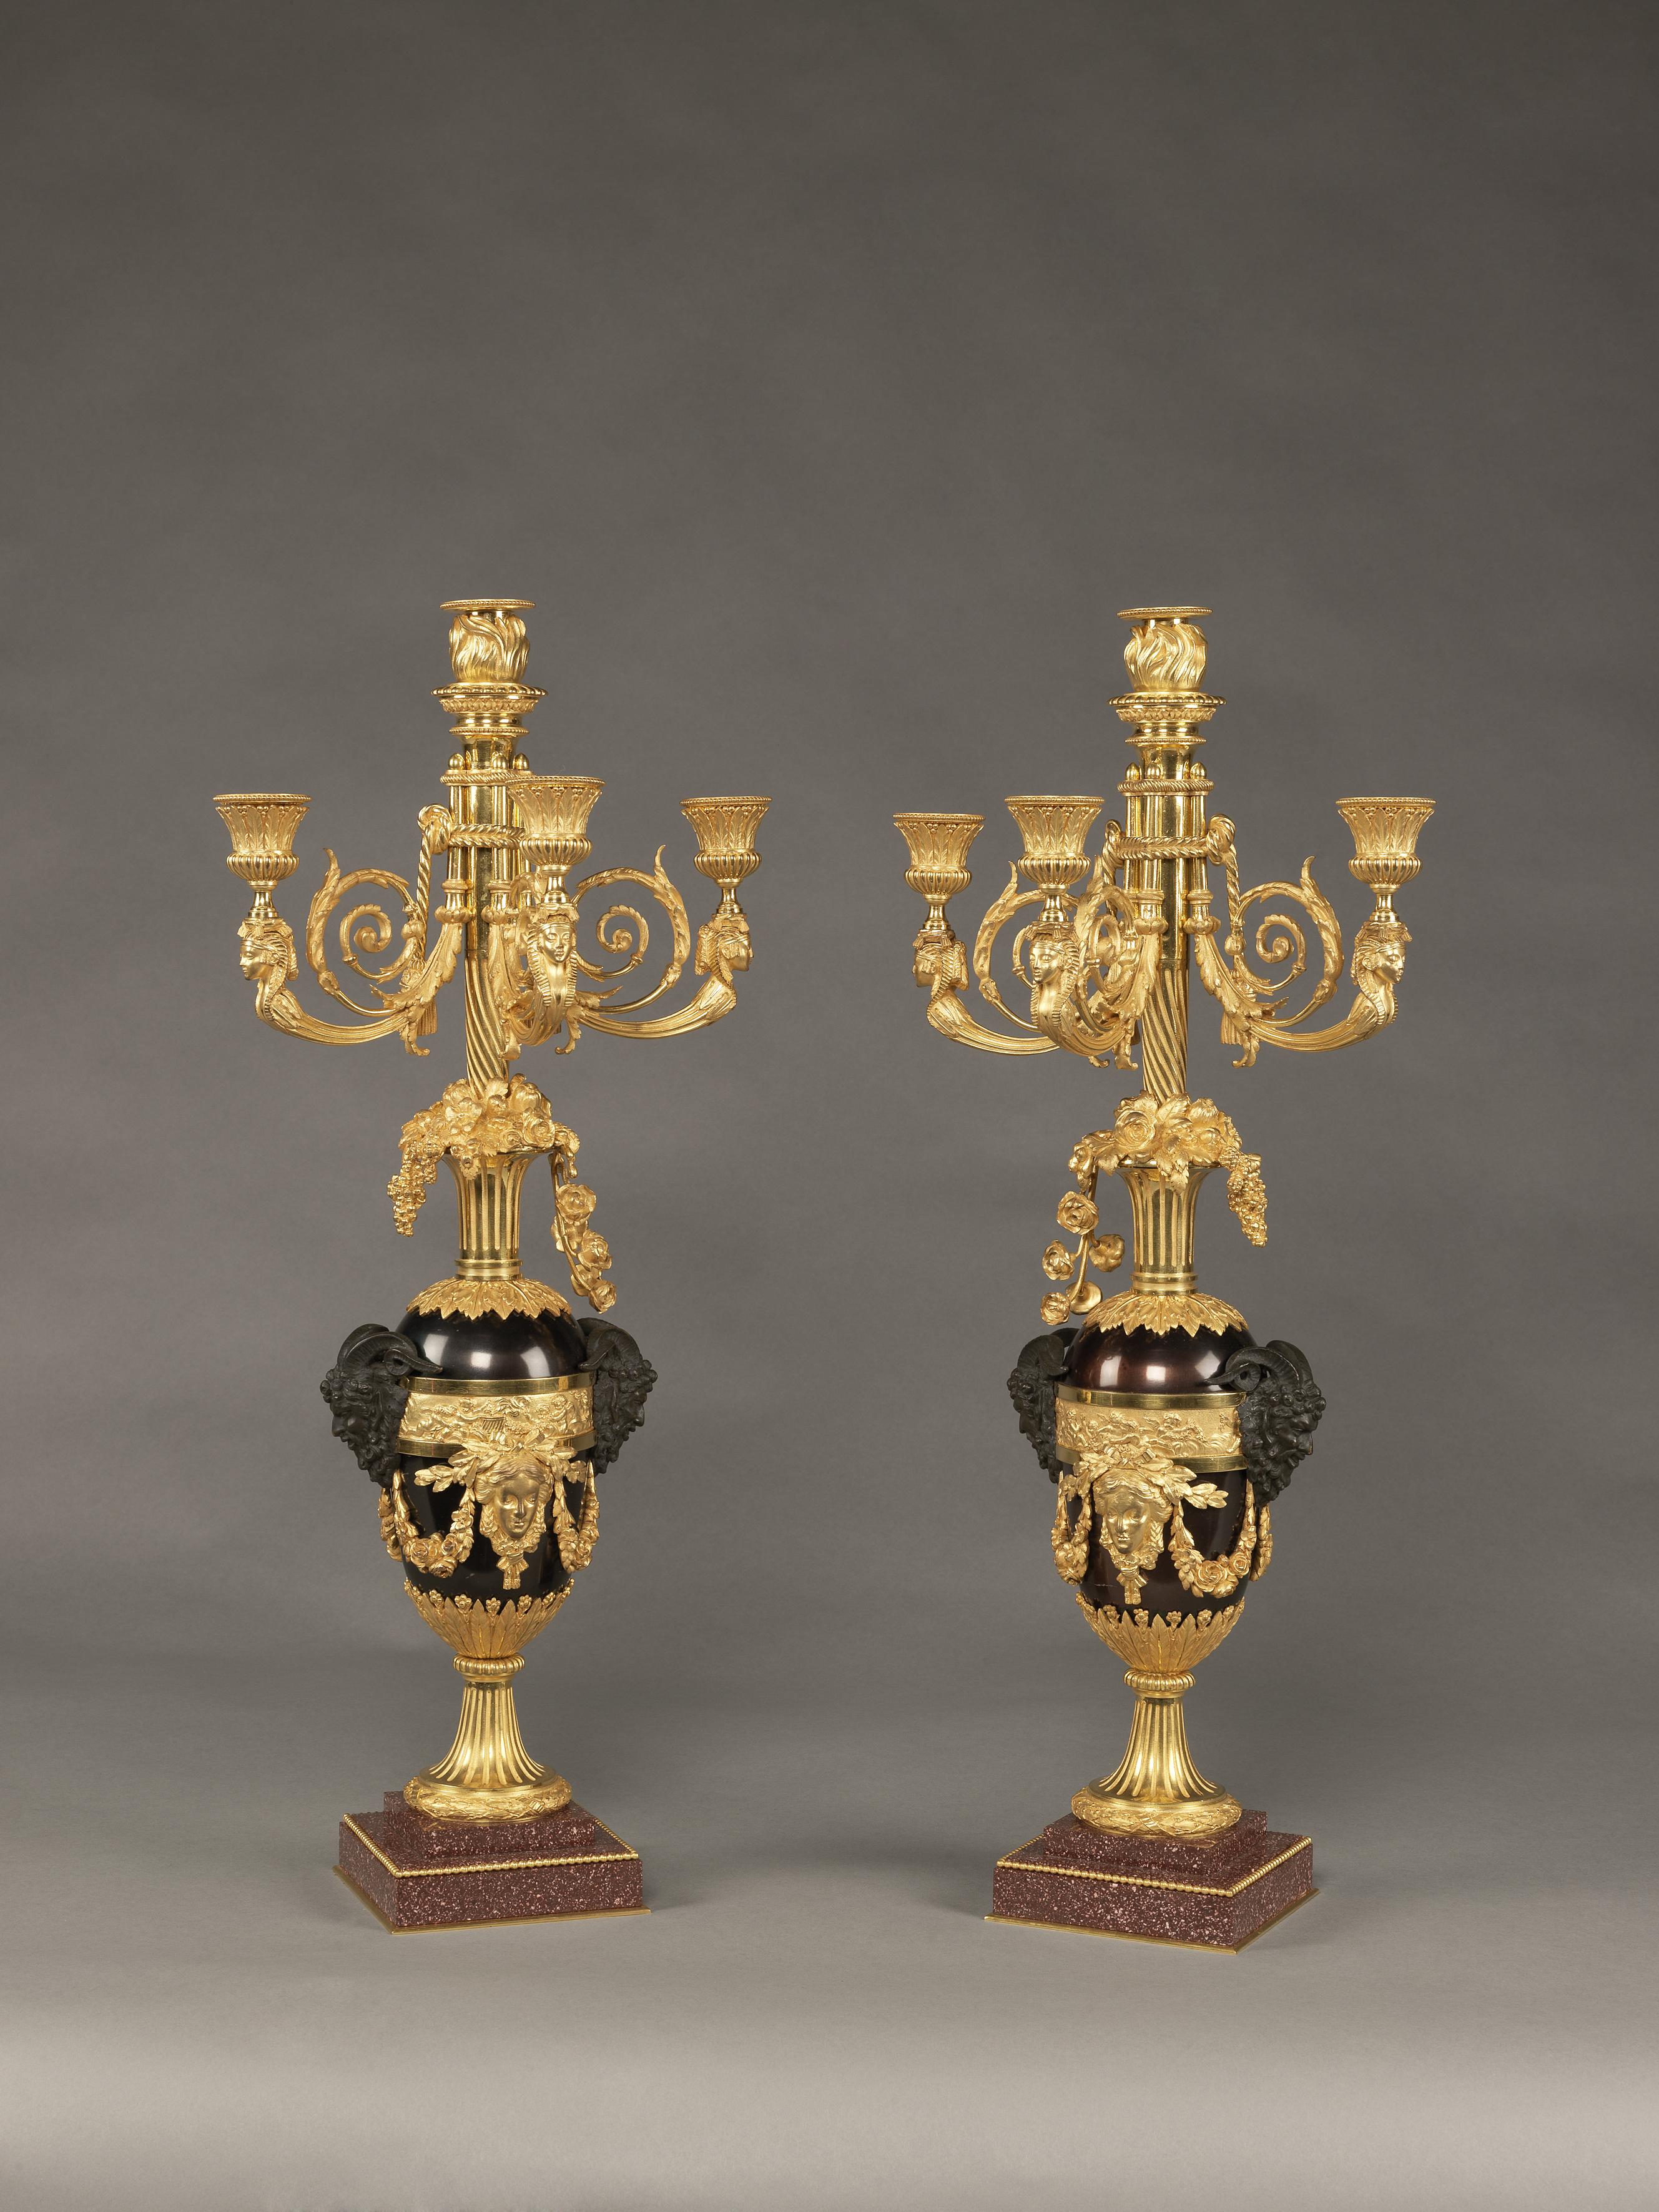 An important pair of Louis XVI style patinated and gilt-bronze four-light candelabra after the model by François Rémond, now in the Wallace collection, London.

French, circa 1830. 

Stamped to one bronze ring ‘RG’. 

Each candelabra has a